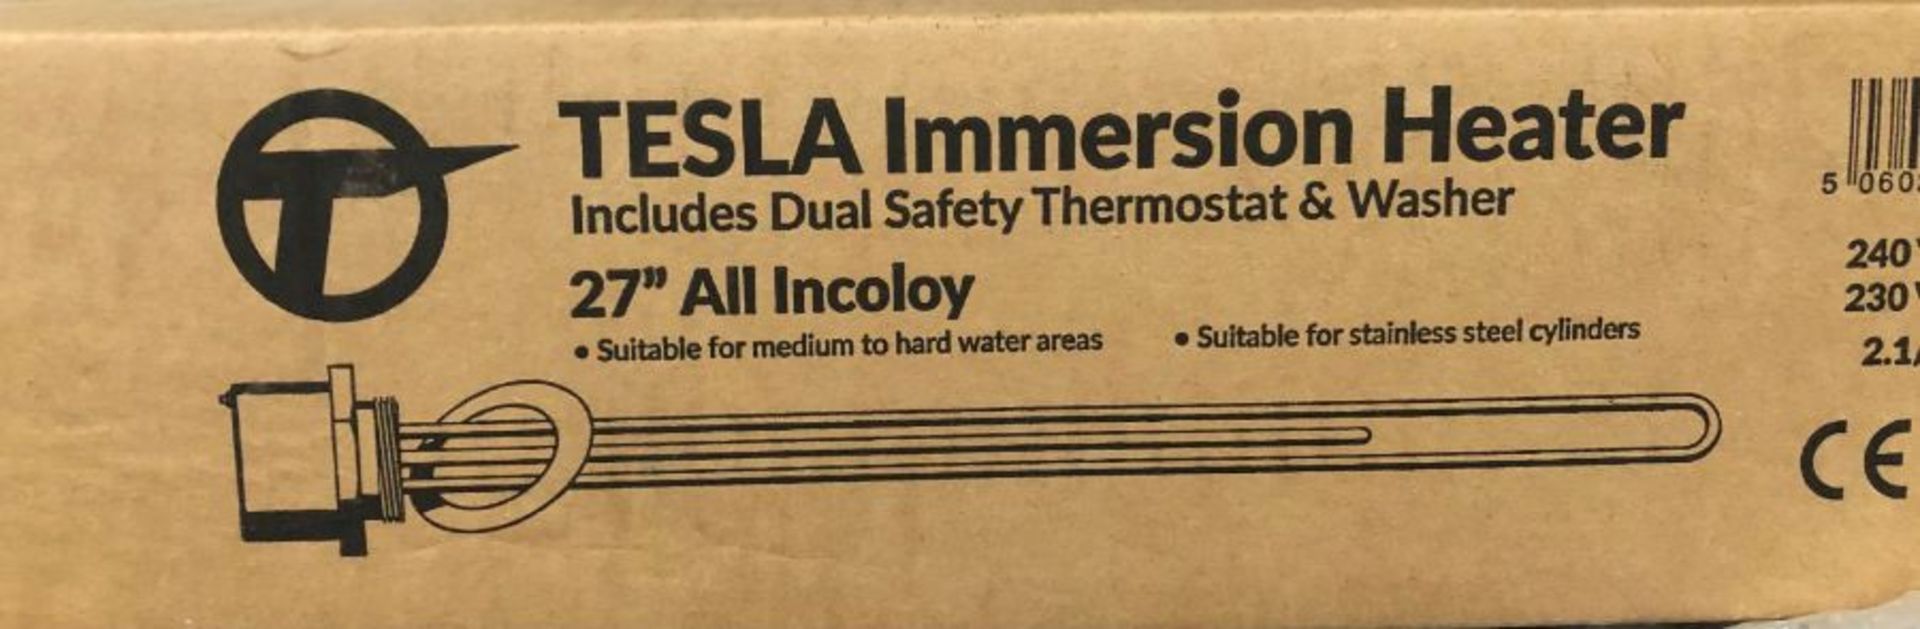 1 X TESLA IMMERSION HEATER ELEMENT WITH DUEL SAFETY THEROMOSTAT AND WASHER / UNTESTED CUSTOMER